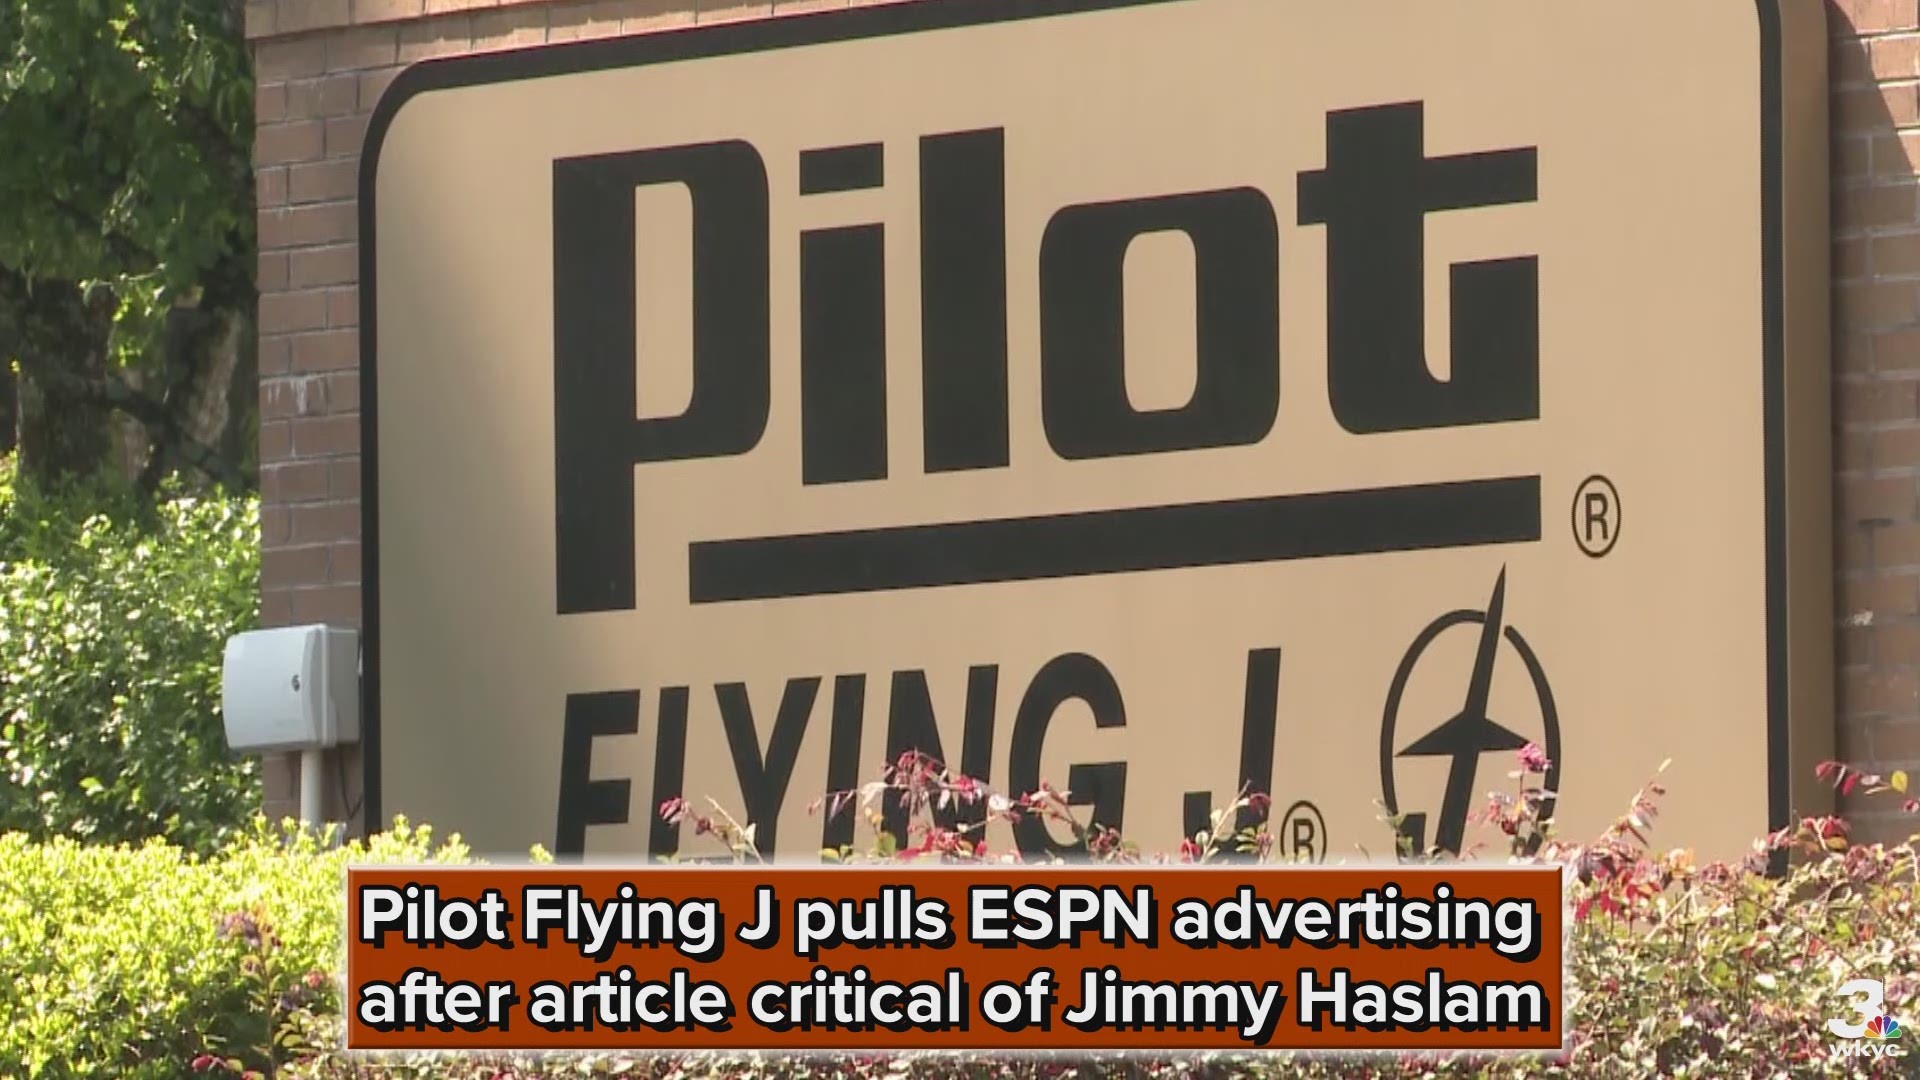 According to the Sports Business Daily, Pilot Flying J has ended its advertising and sponsorship with ESPN.